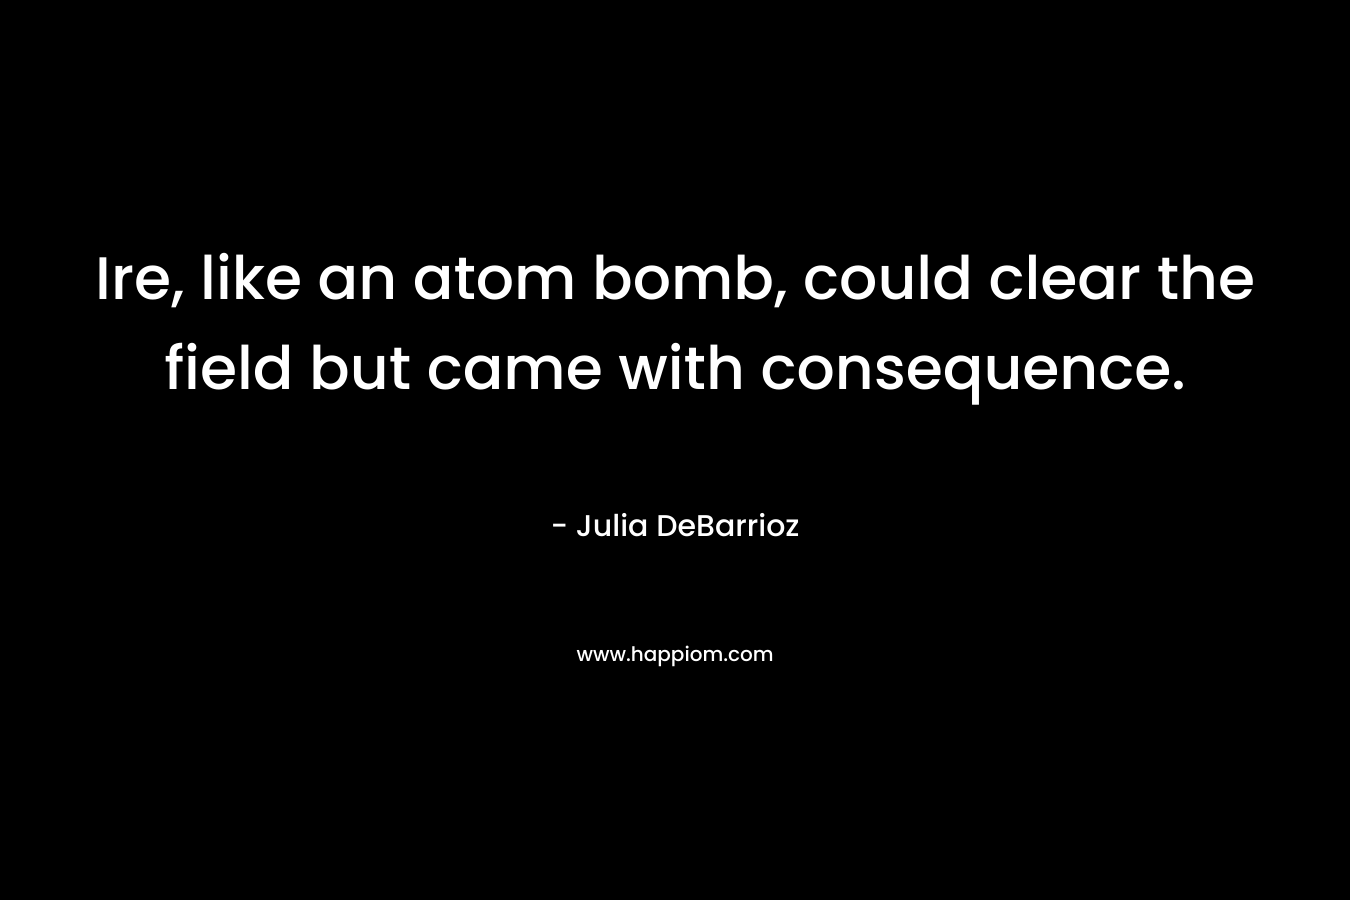 Ire, like an atom bomb, could clear the field but came with consequence.